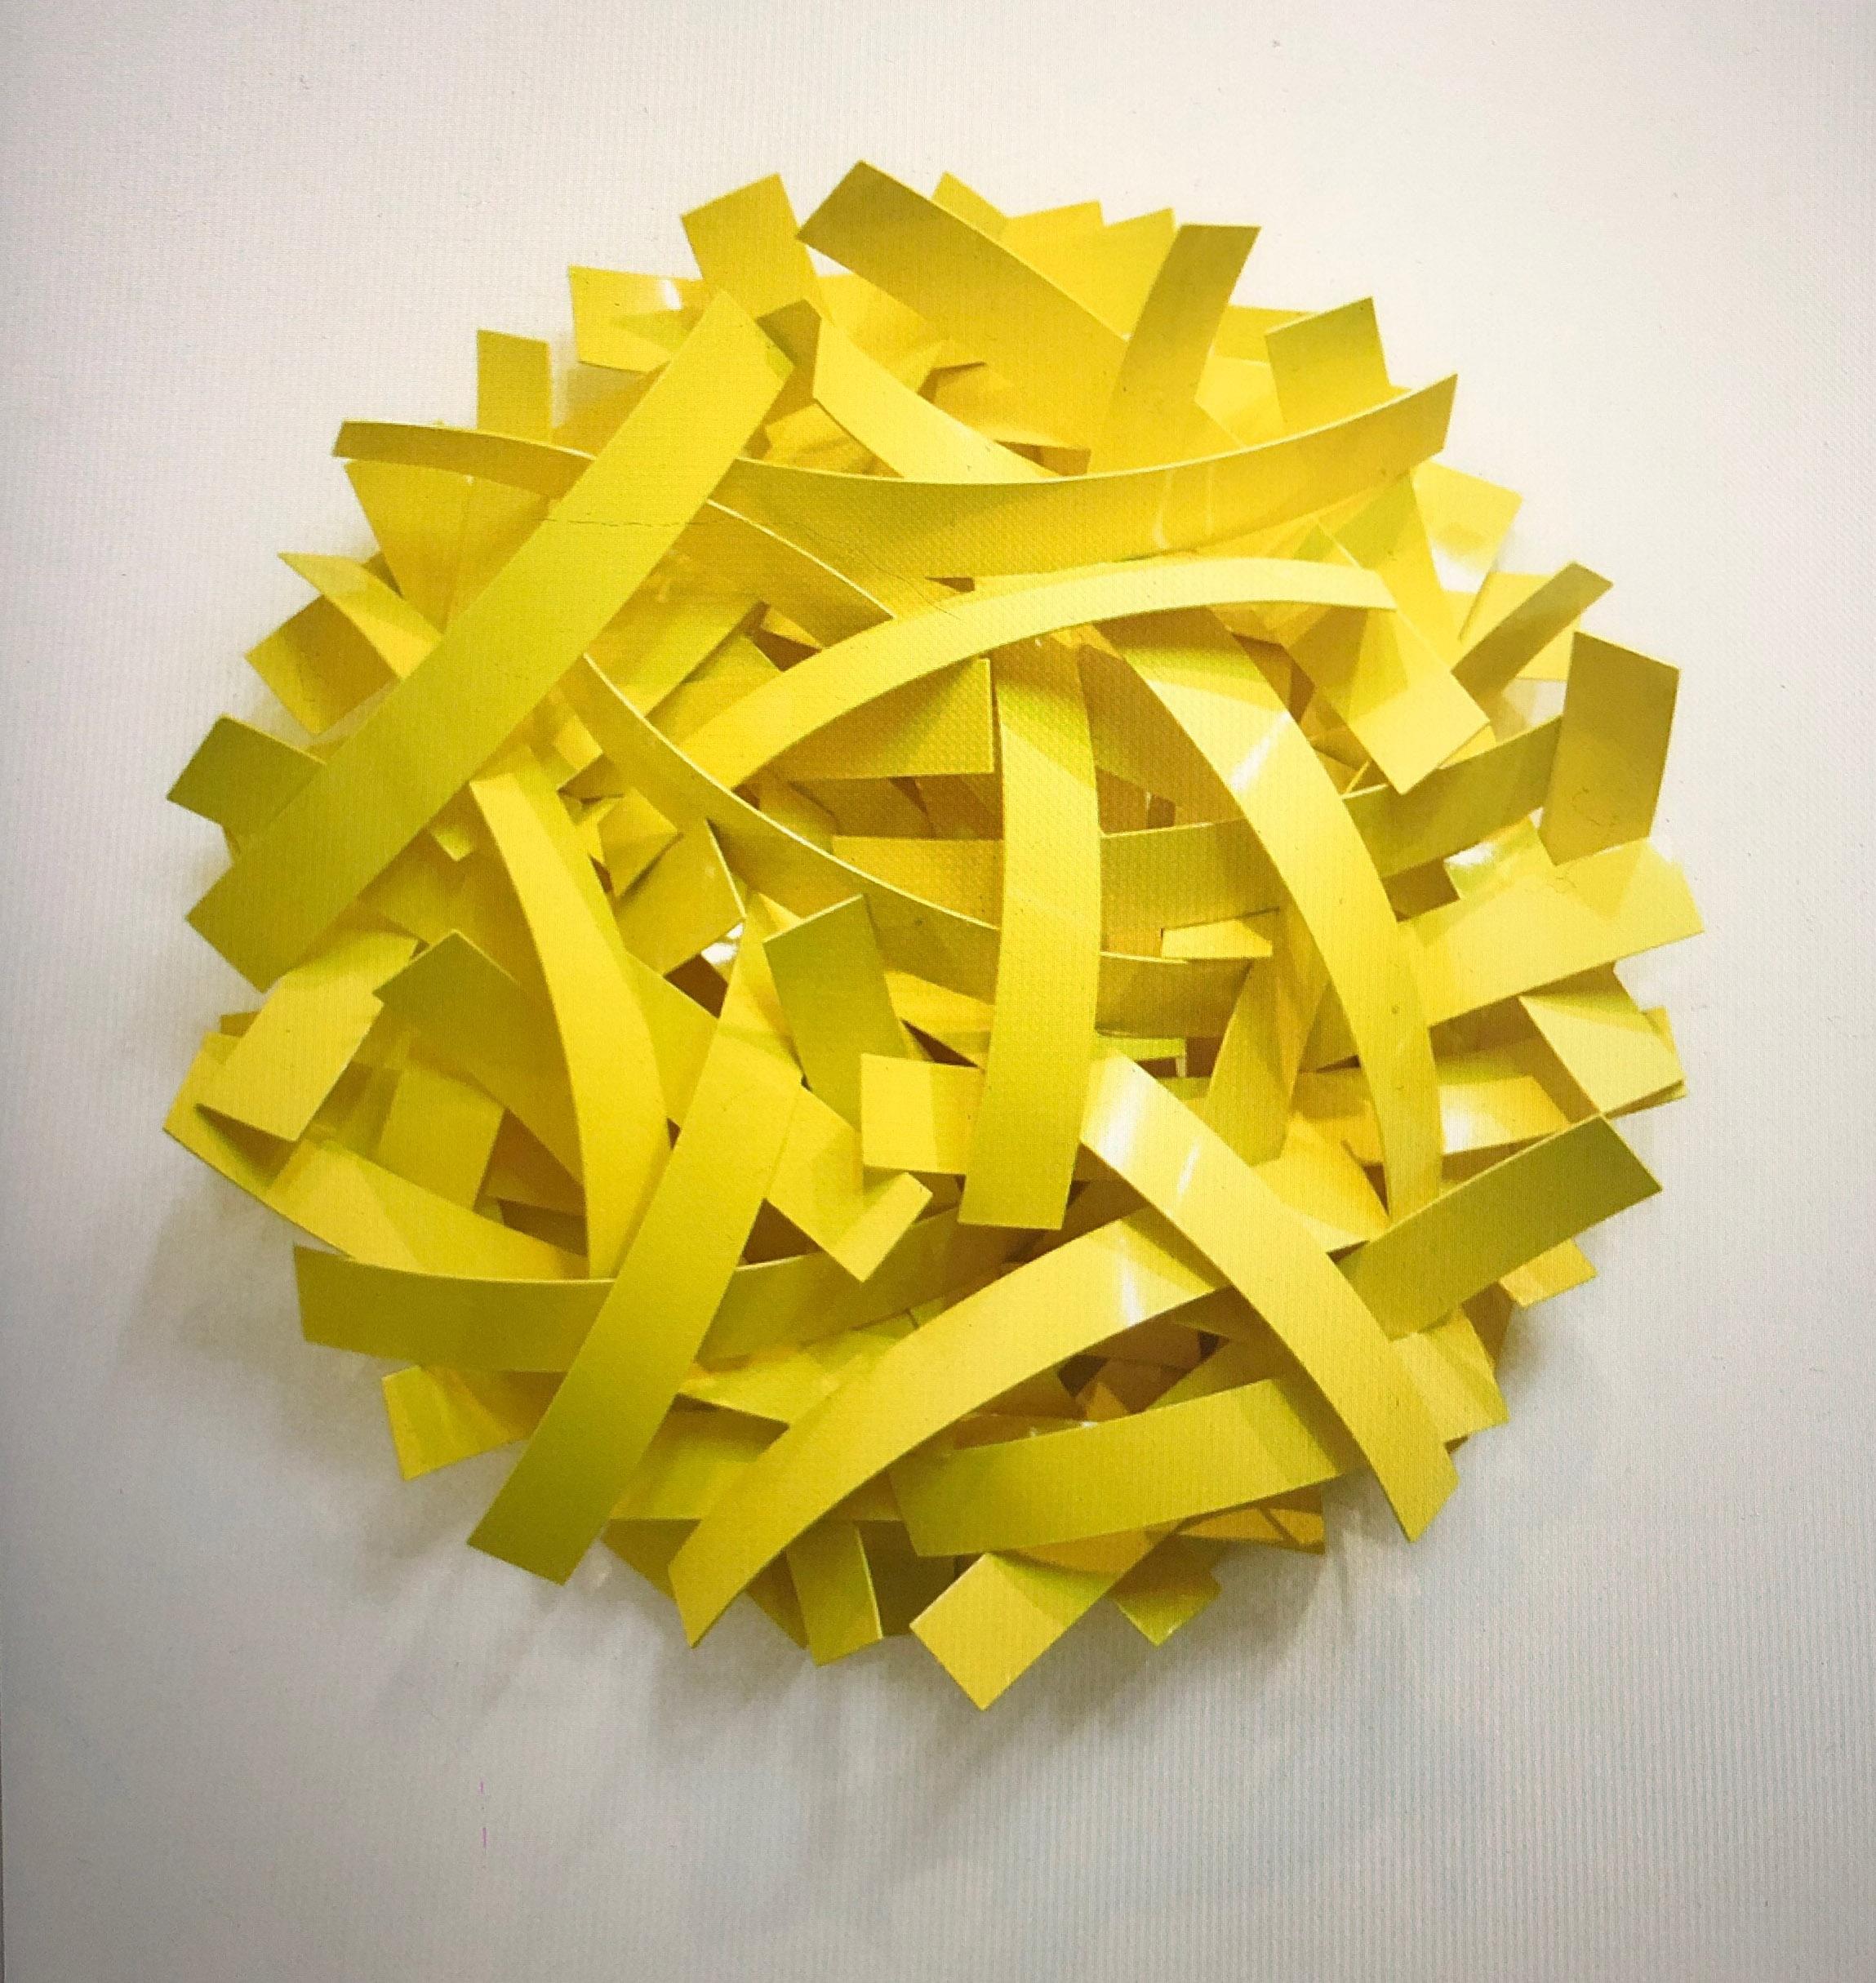 93 Million Miles #3 (Indoor and Outdoor Yellow Abstract Sculpture) 1